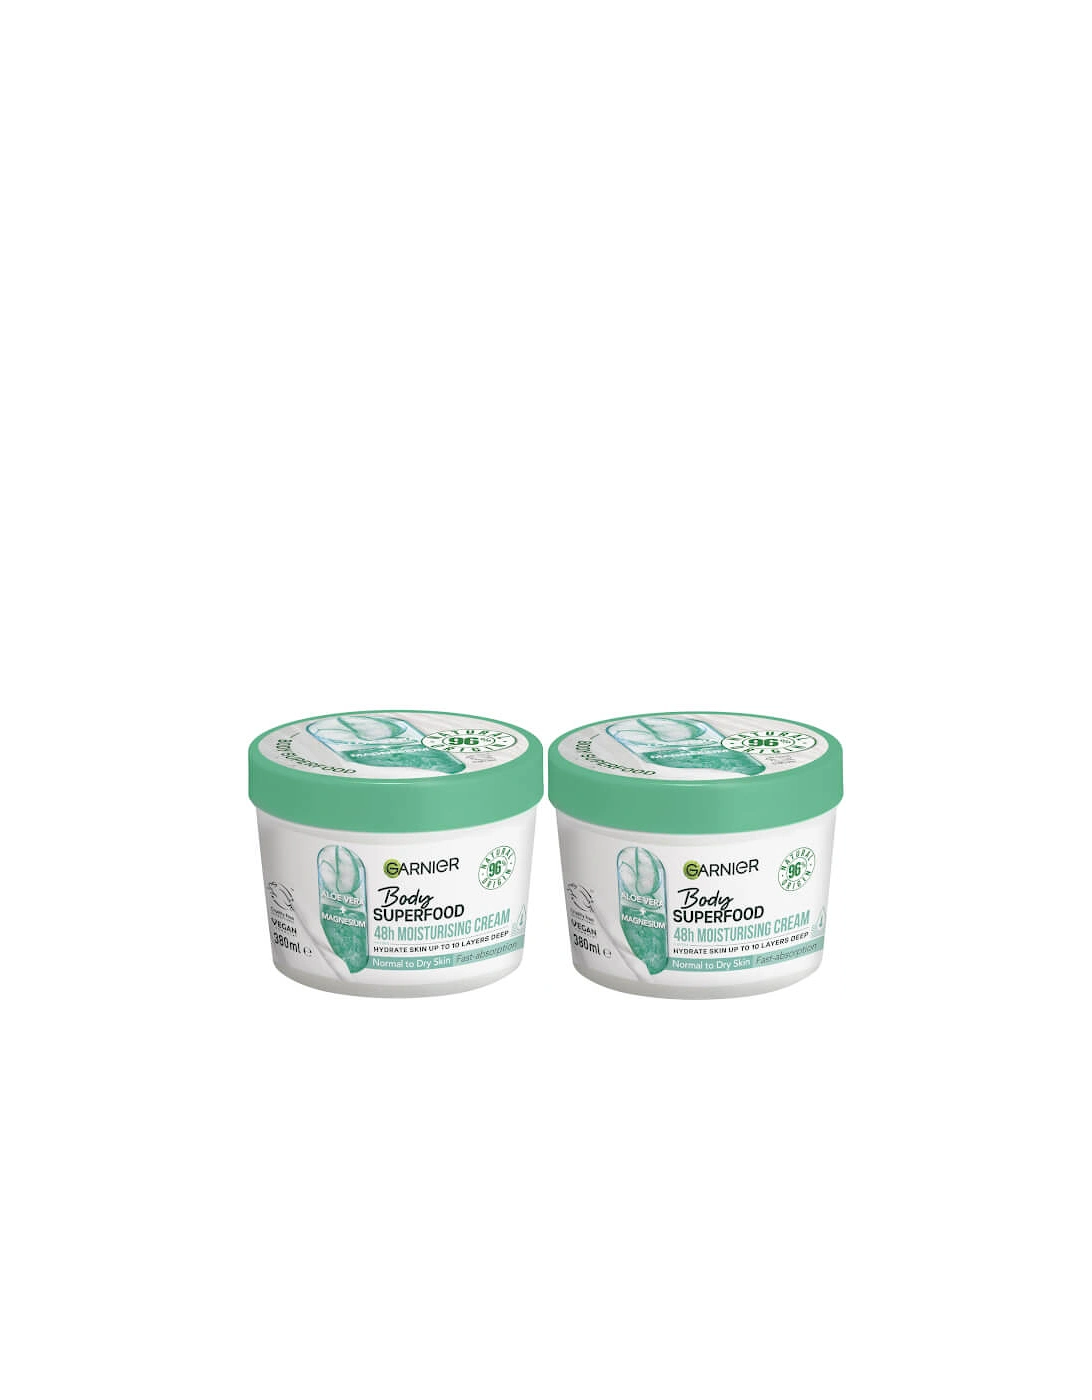 Body Superfood, Moisturising and Soothing Body Cream, With Aloe Vera and Magnesium, Body Cream for Normal to Dry Skin Duo, 2 of 1